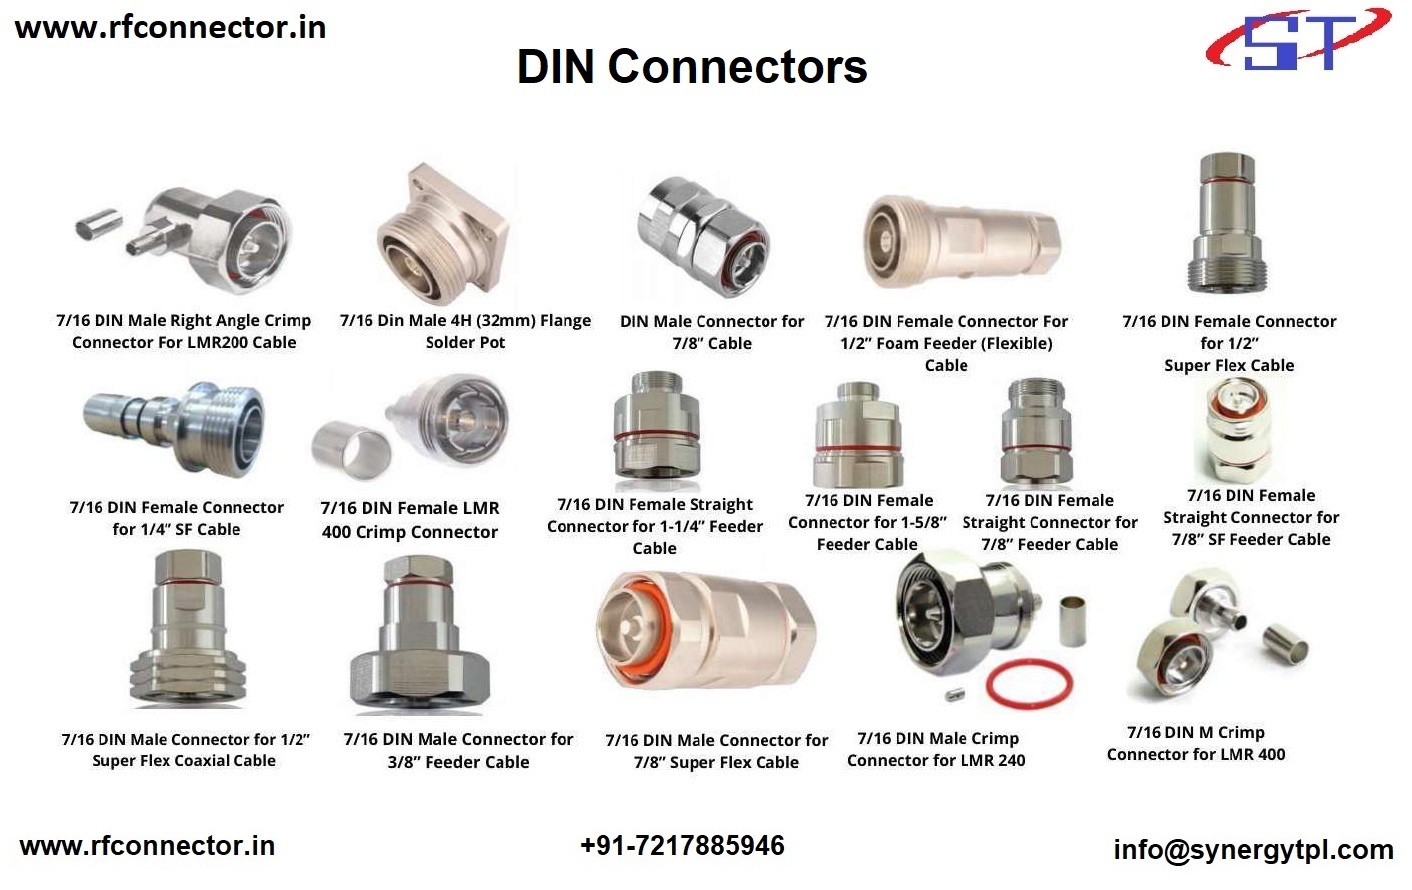 DIN FEMALE 4 HOLE 1-4 CLAMP CONNECTOR